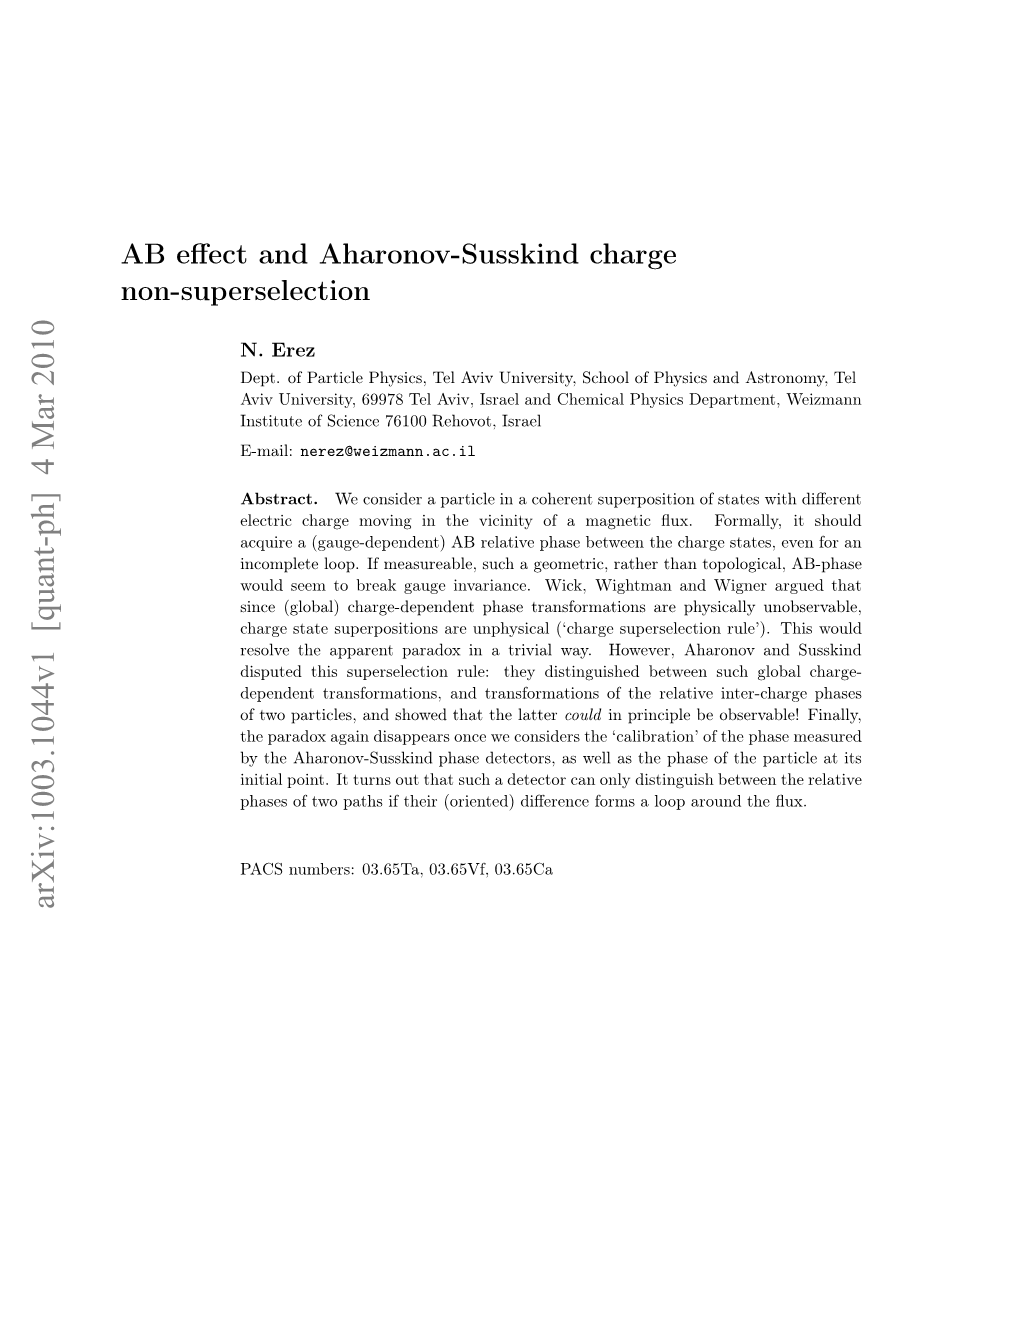 AB Effect and Aharonov-Susskind Charge Non-Superselection